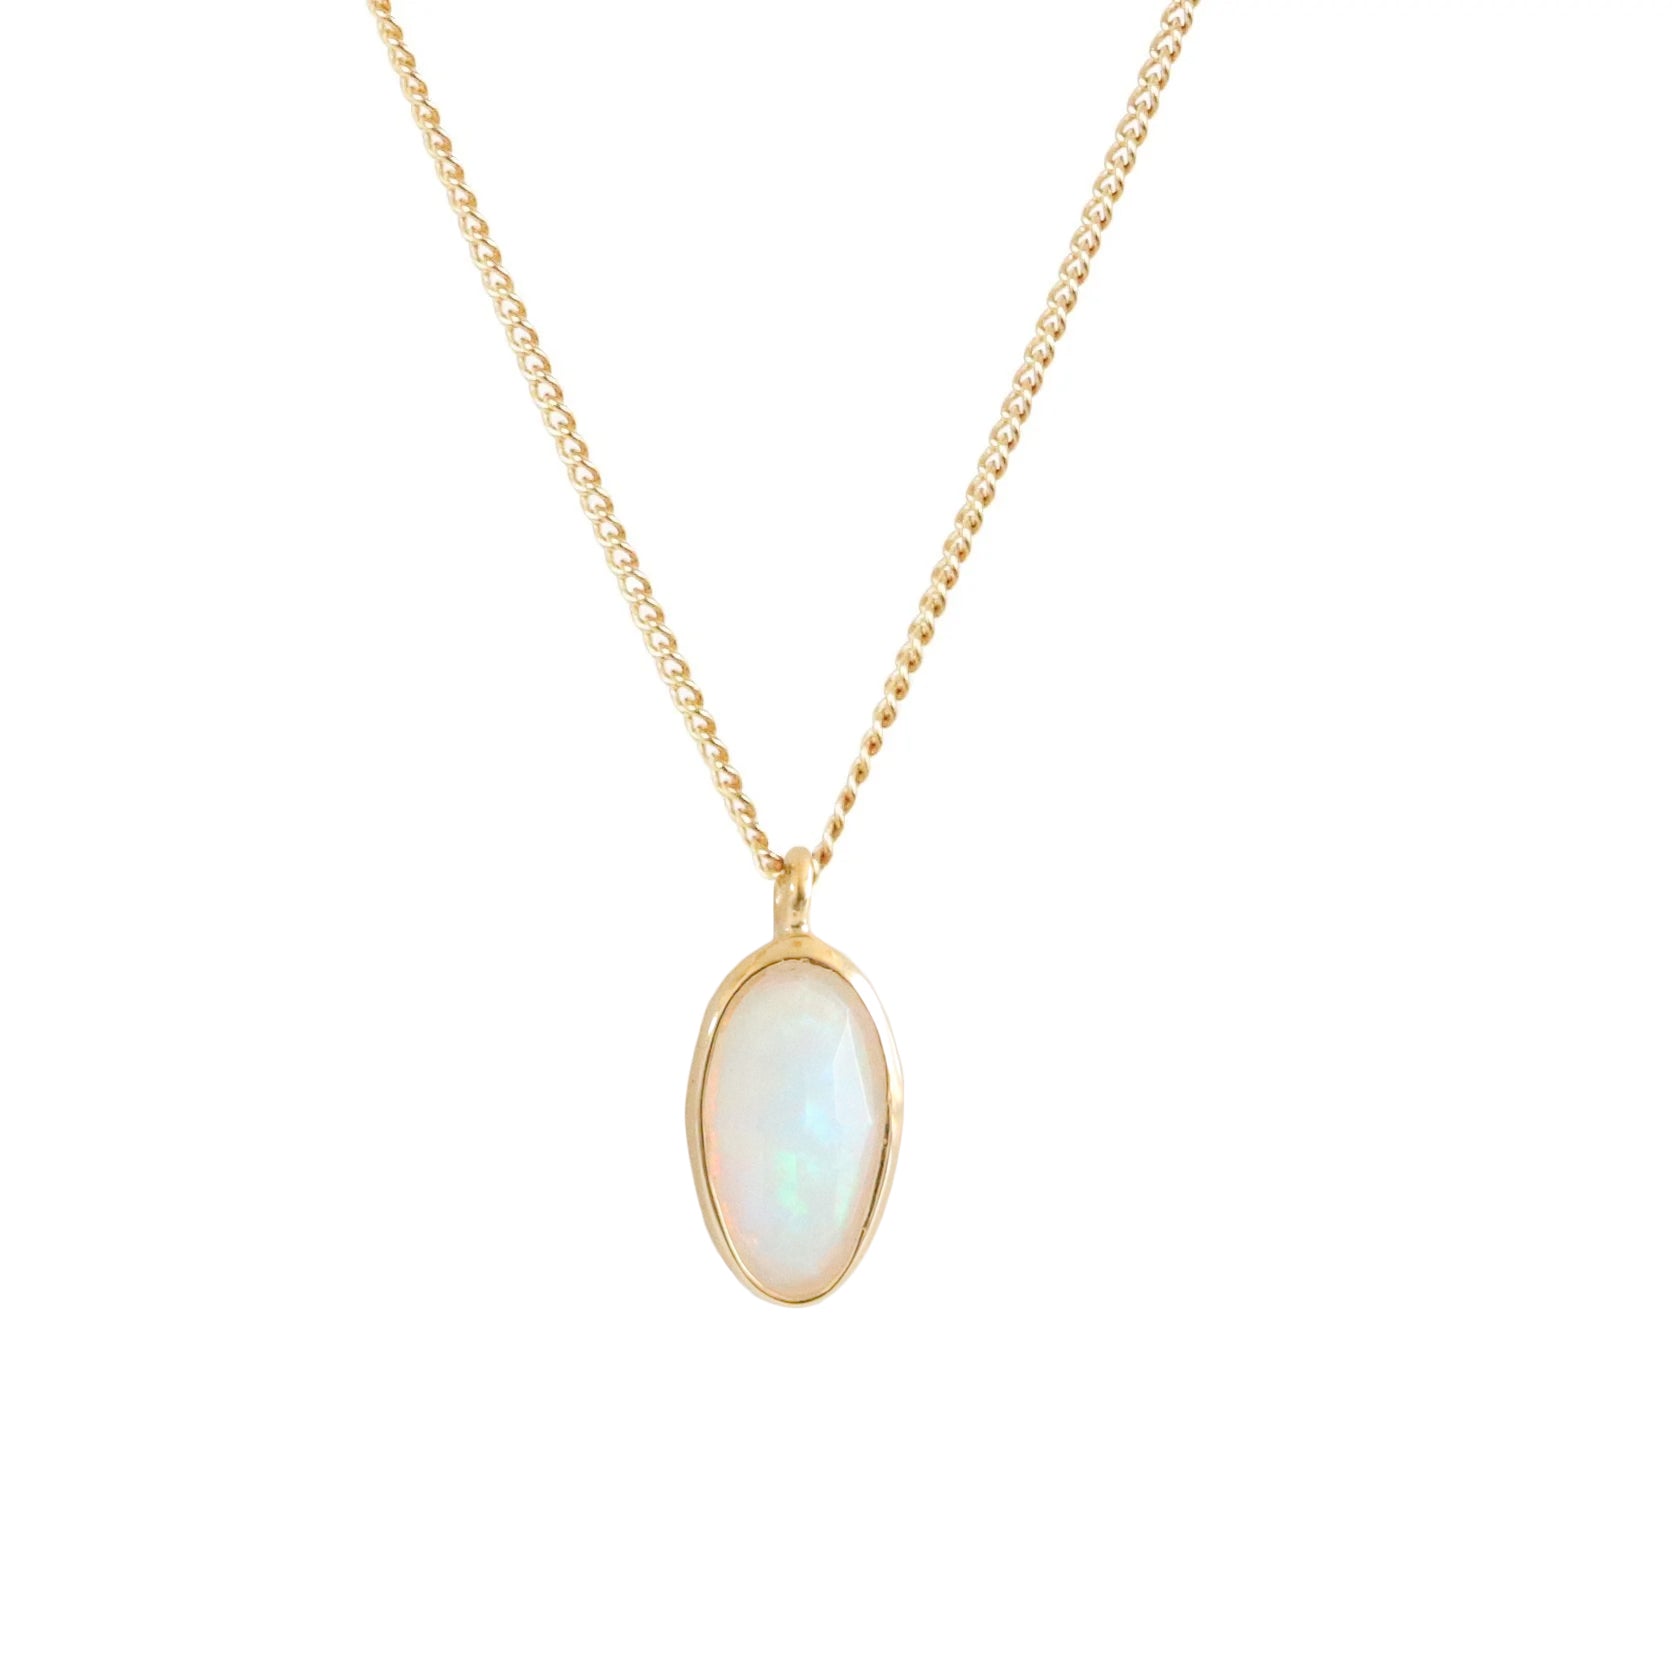 DAY 12 - TINY PROTECT OVAL PENDANT - AUSTRALIAN OPAL & GOLD - SO PRETTY CARA COTTER